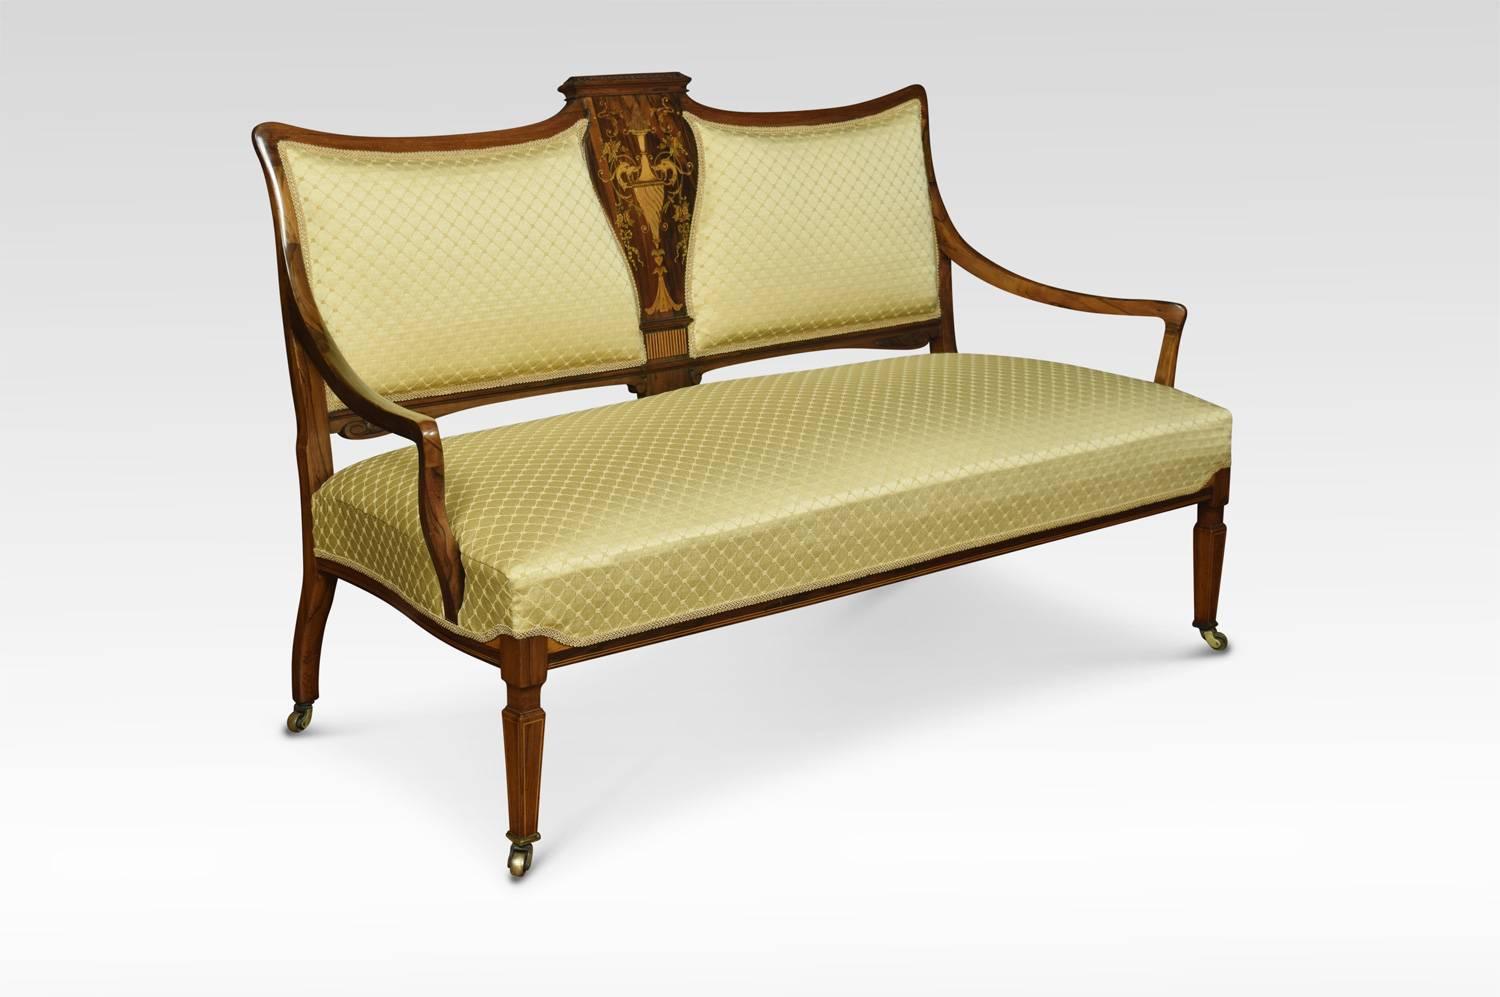 Edwardian inlaid rosewood two-seat settee. The shield shaped back with vase, and scrolling floral inlays with mother-of-pearl detail. The recently upholstered back and seat enclosed by out swept arms. All raised up on square tapering front legs with